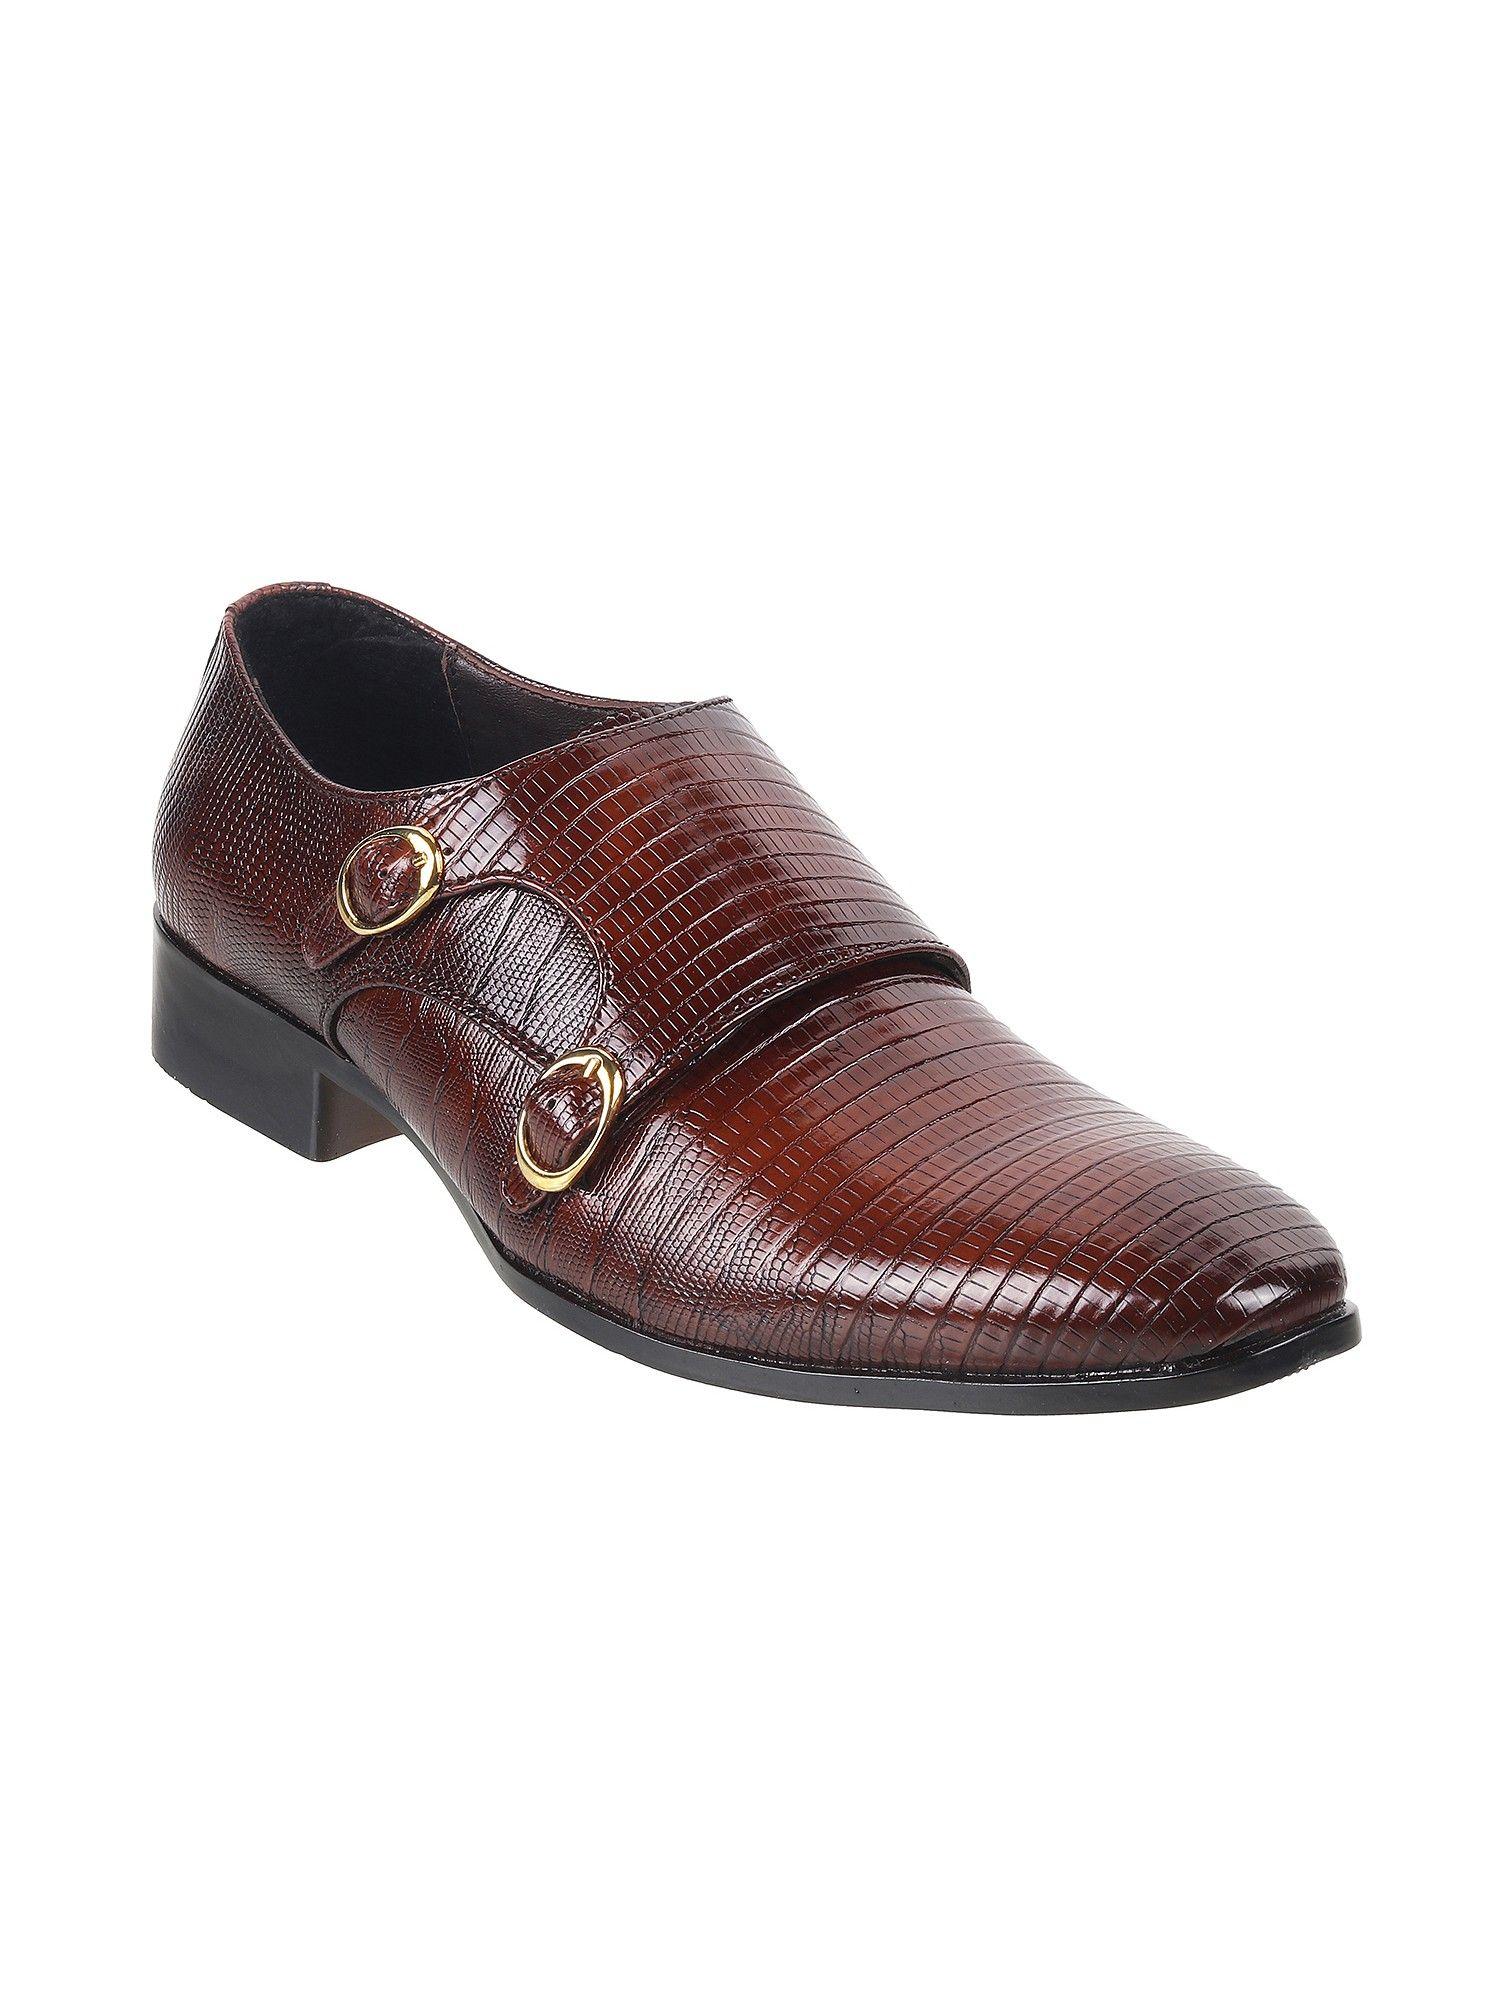 mens brown leather textured monk straps